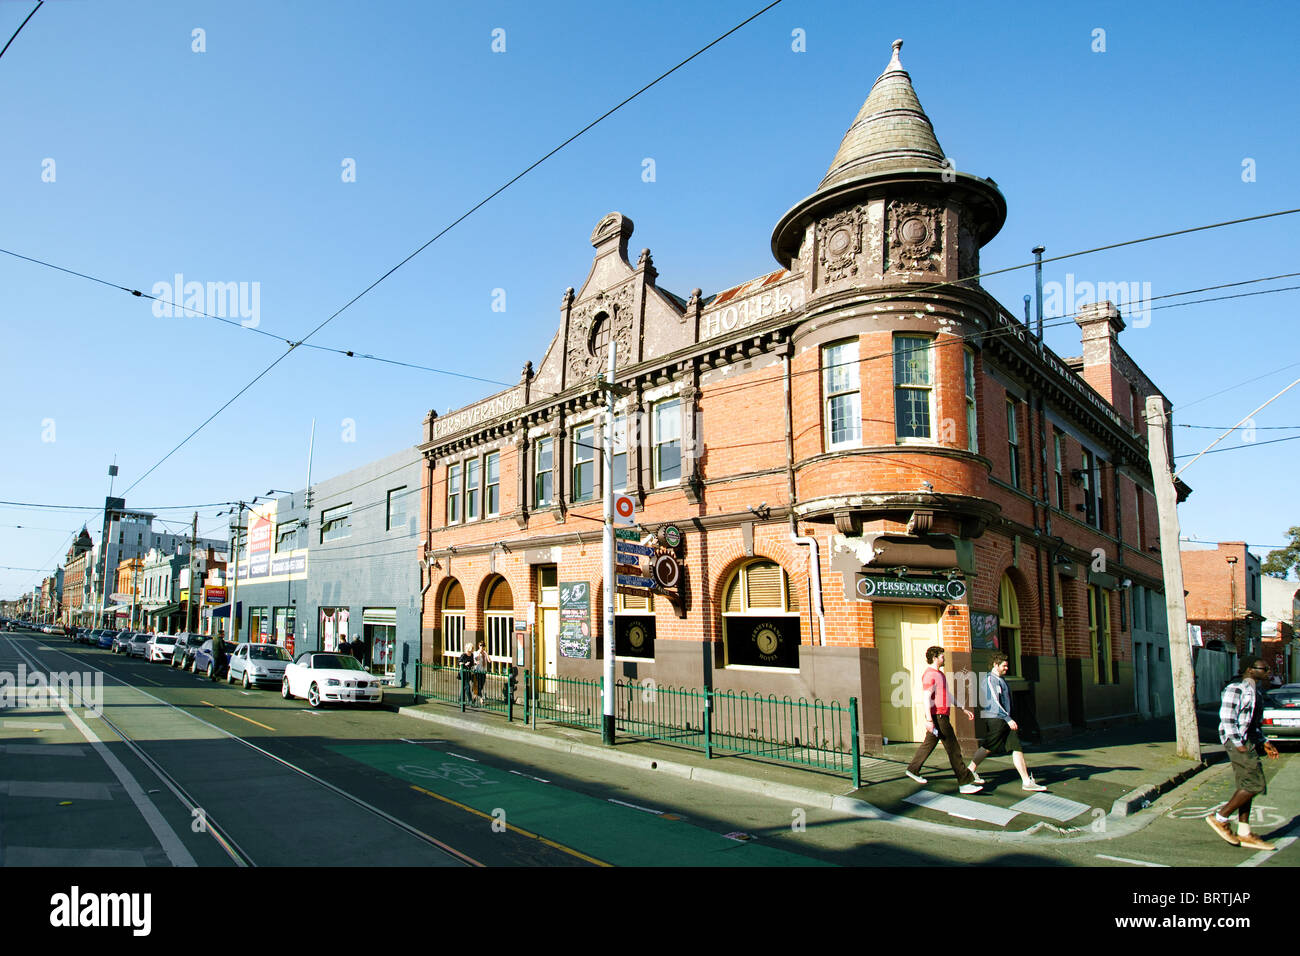 Perseverance Hotel on Brunswick st, has been trading for over 100 years Melbourne Victoria Australia Stock Photo